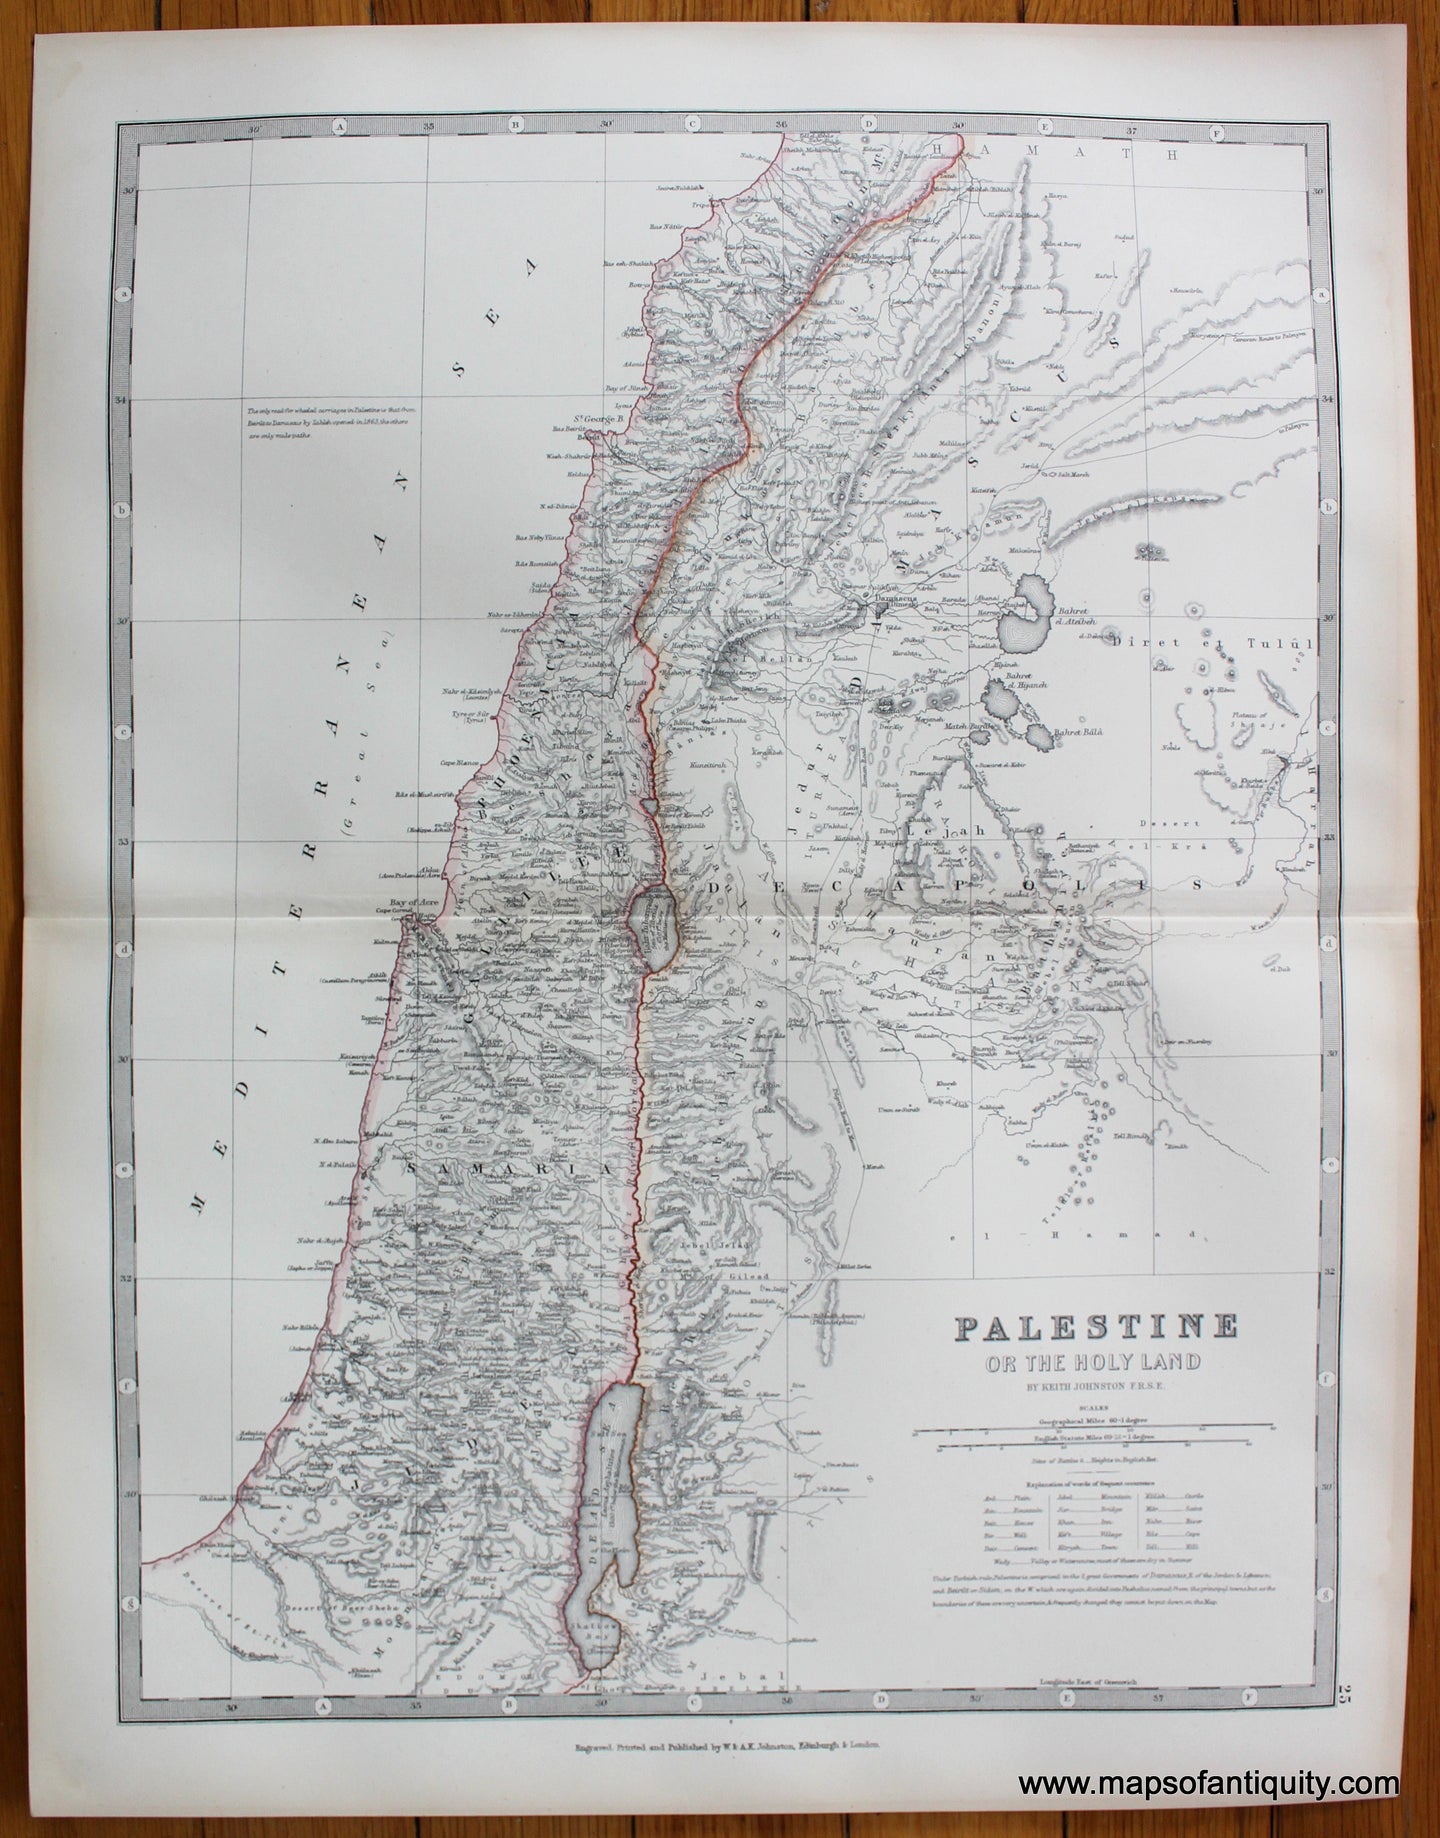 Antique-Printed-Color-Map-Palestine-or-The-Holy-Land-Middle-East-&-Holy-Land--1881-Johnston-Maps-Of-Antiquity